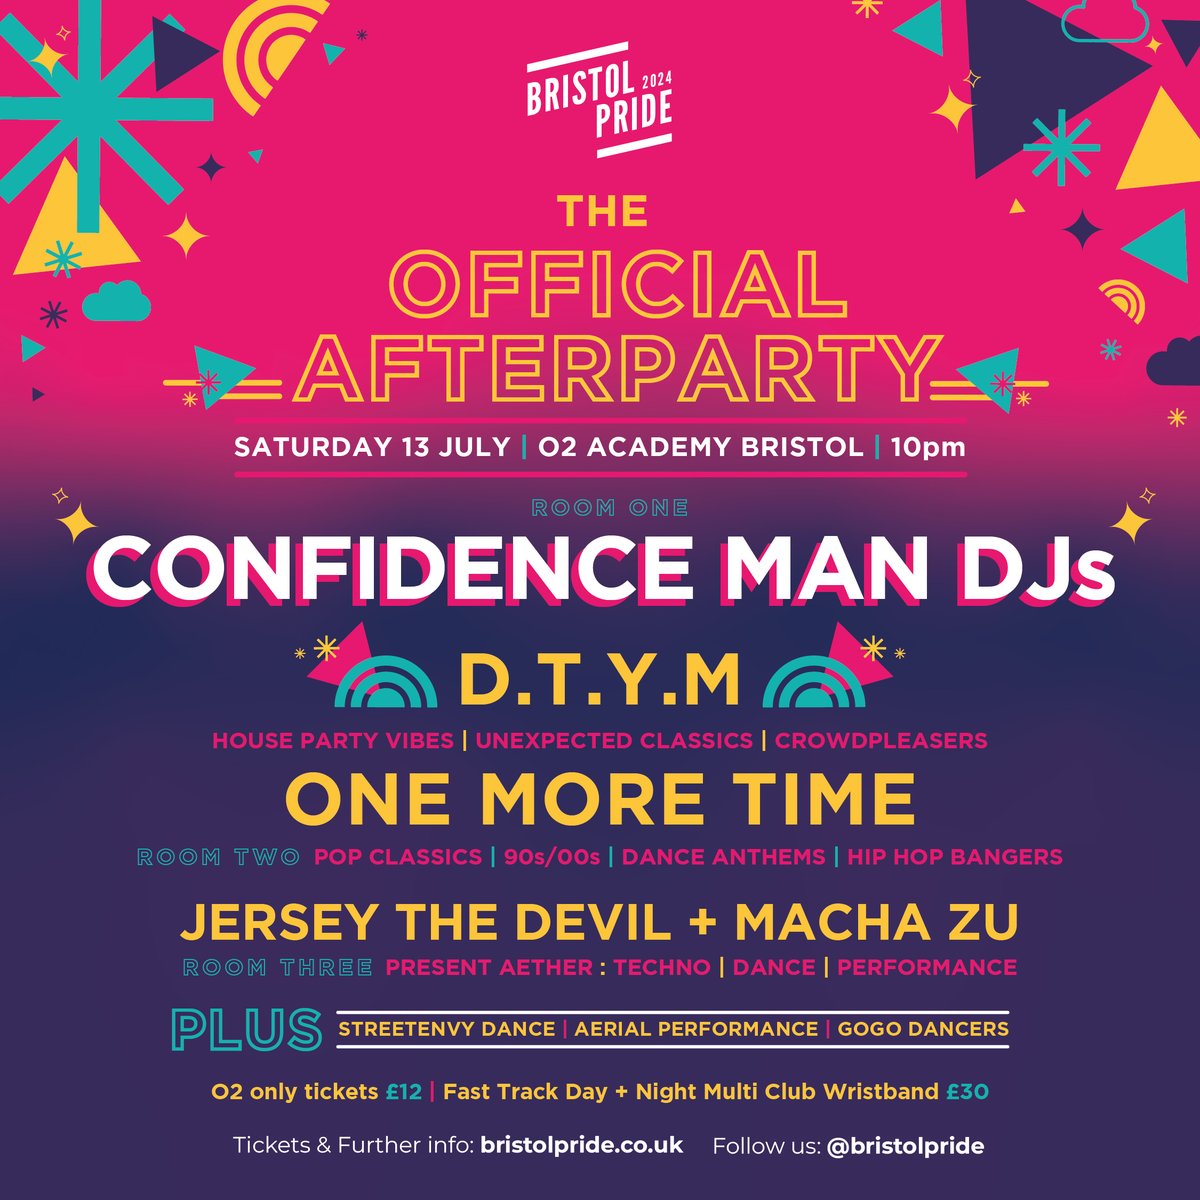 The incredible @bristolpride afterparty takes over #O2AcademyBristol on Sat 13 Jul, featuring three incredible rooms of top international talent, including headliner @confidencemanTM Get your Priority Tickets now, with general sale from 5pm Sun 5 May 👉 amg-venues.com/z7RV50RvP2f